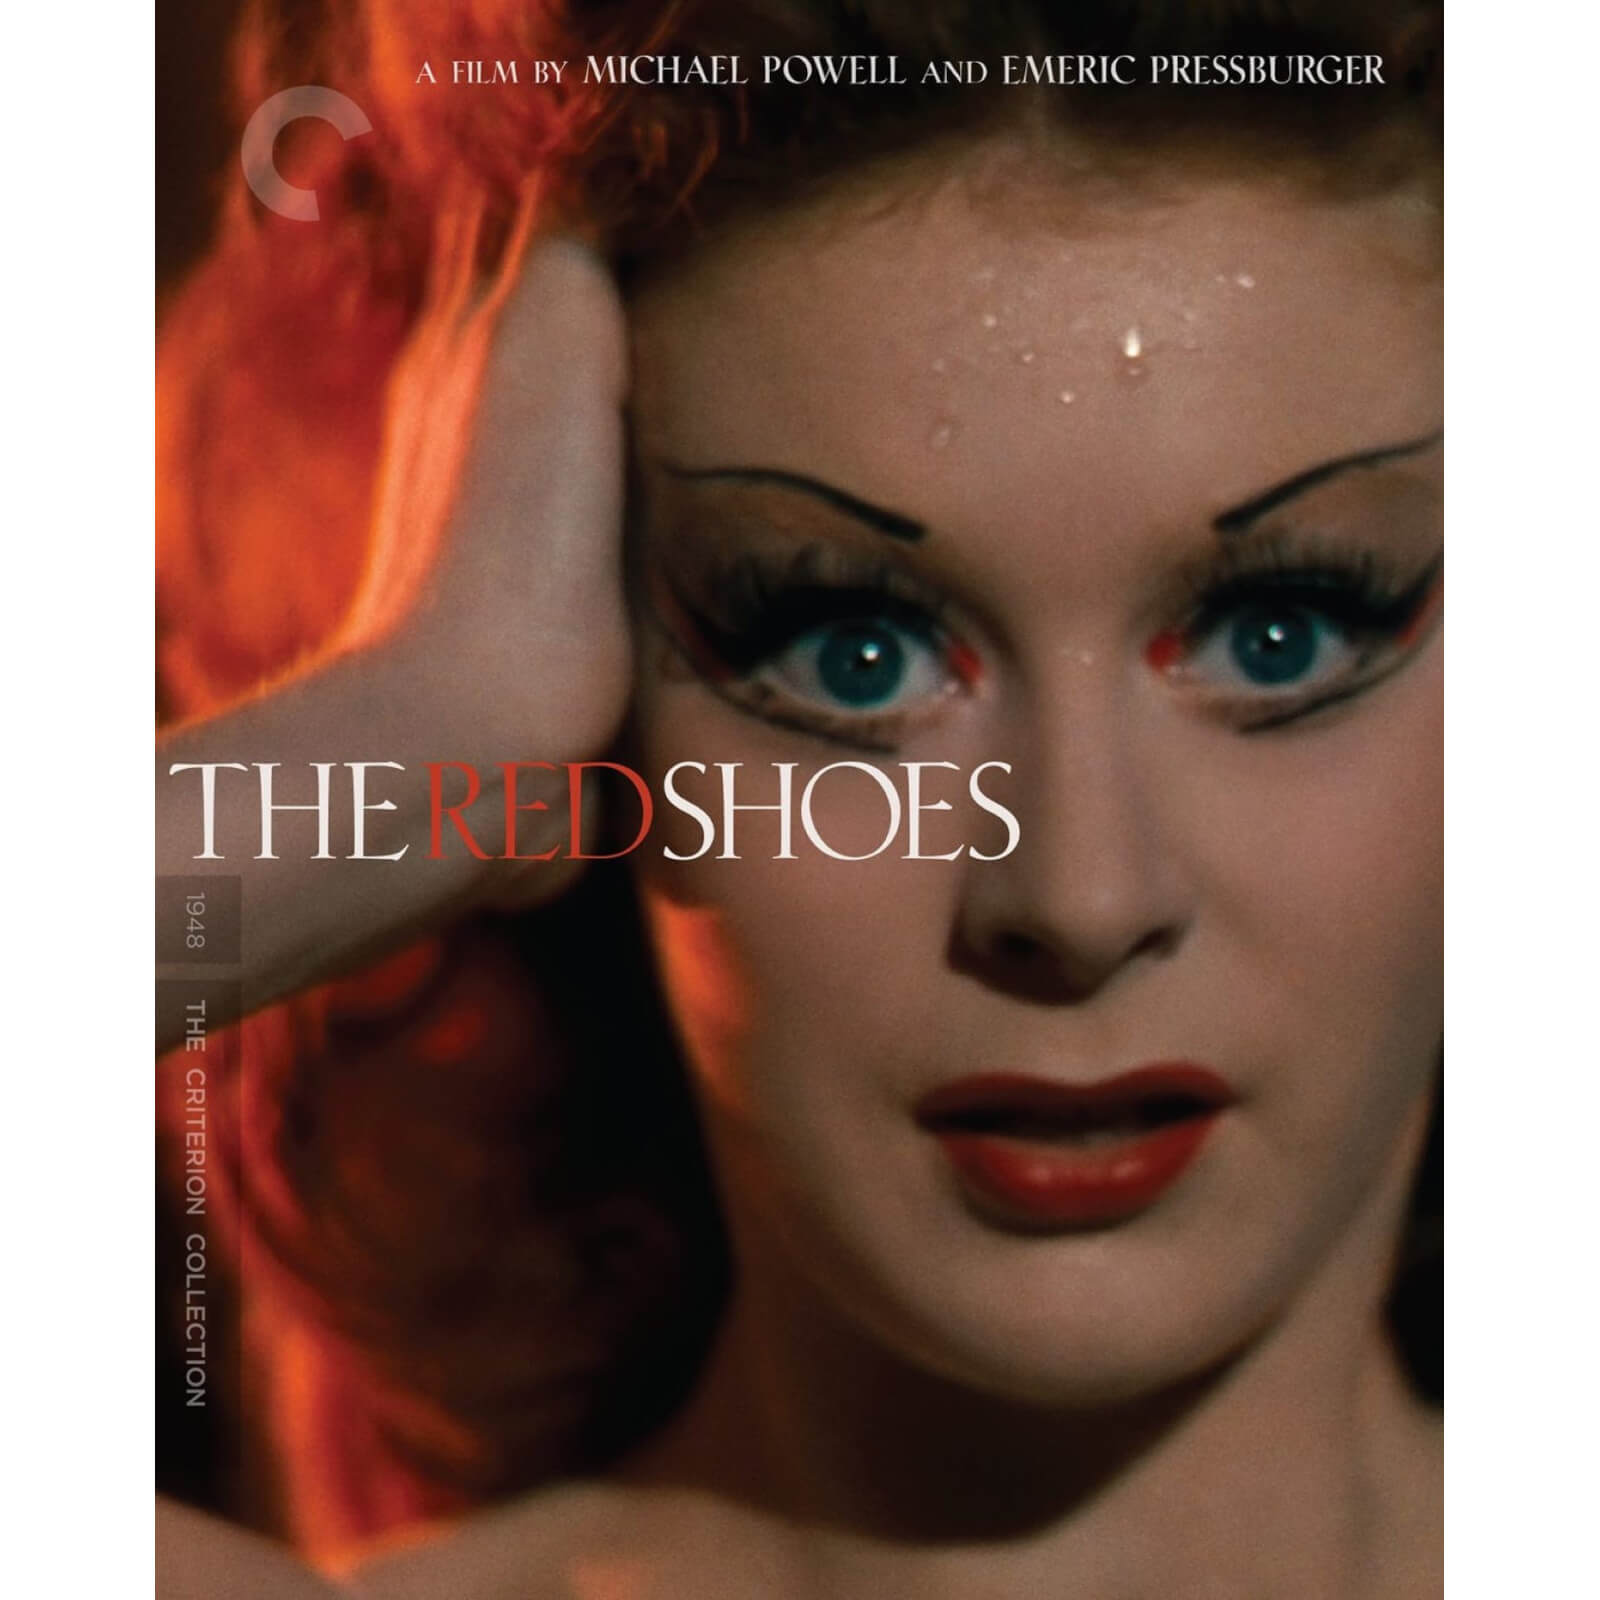 The Red Shoes - The Criterion Collection 4K Ultra HD (Includes Blu-ray) (US Import)